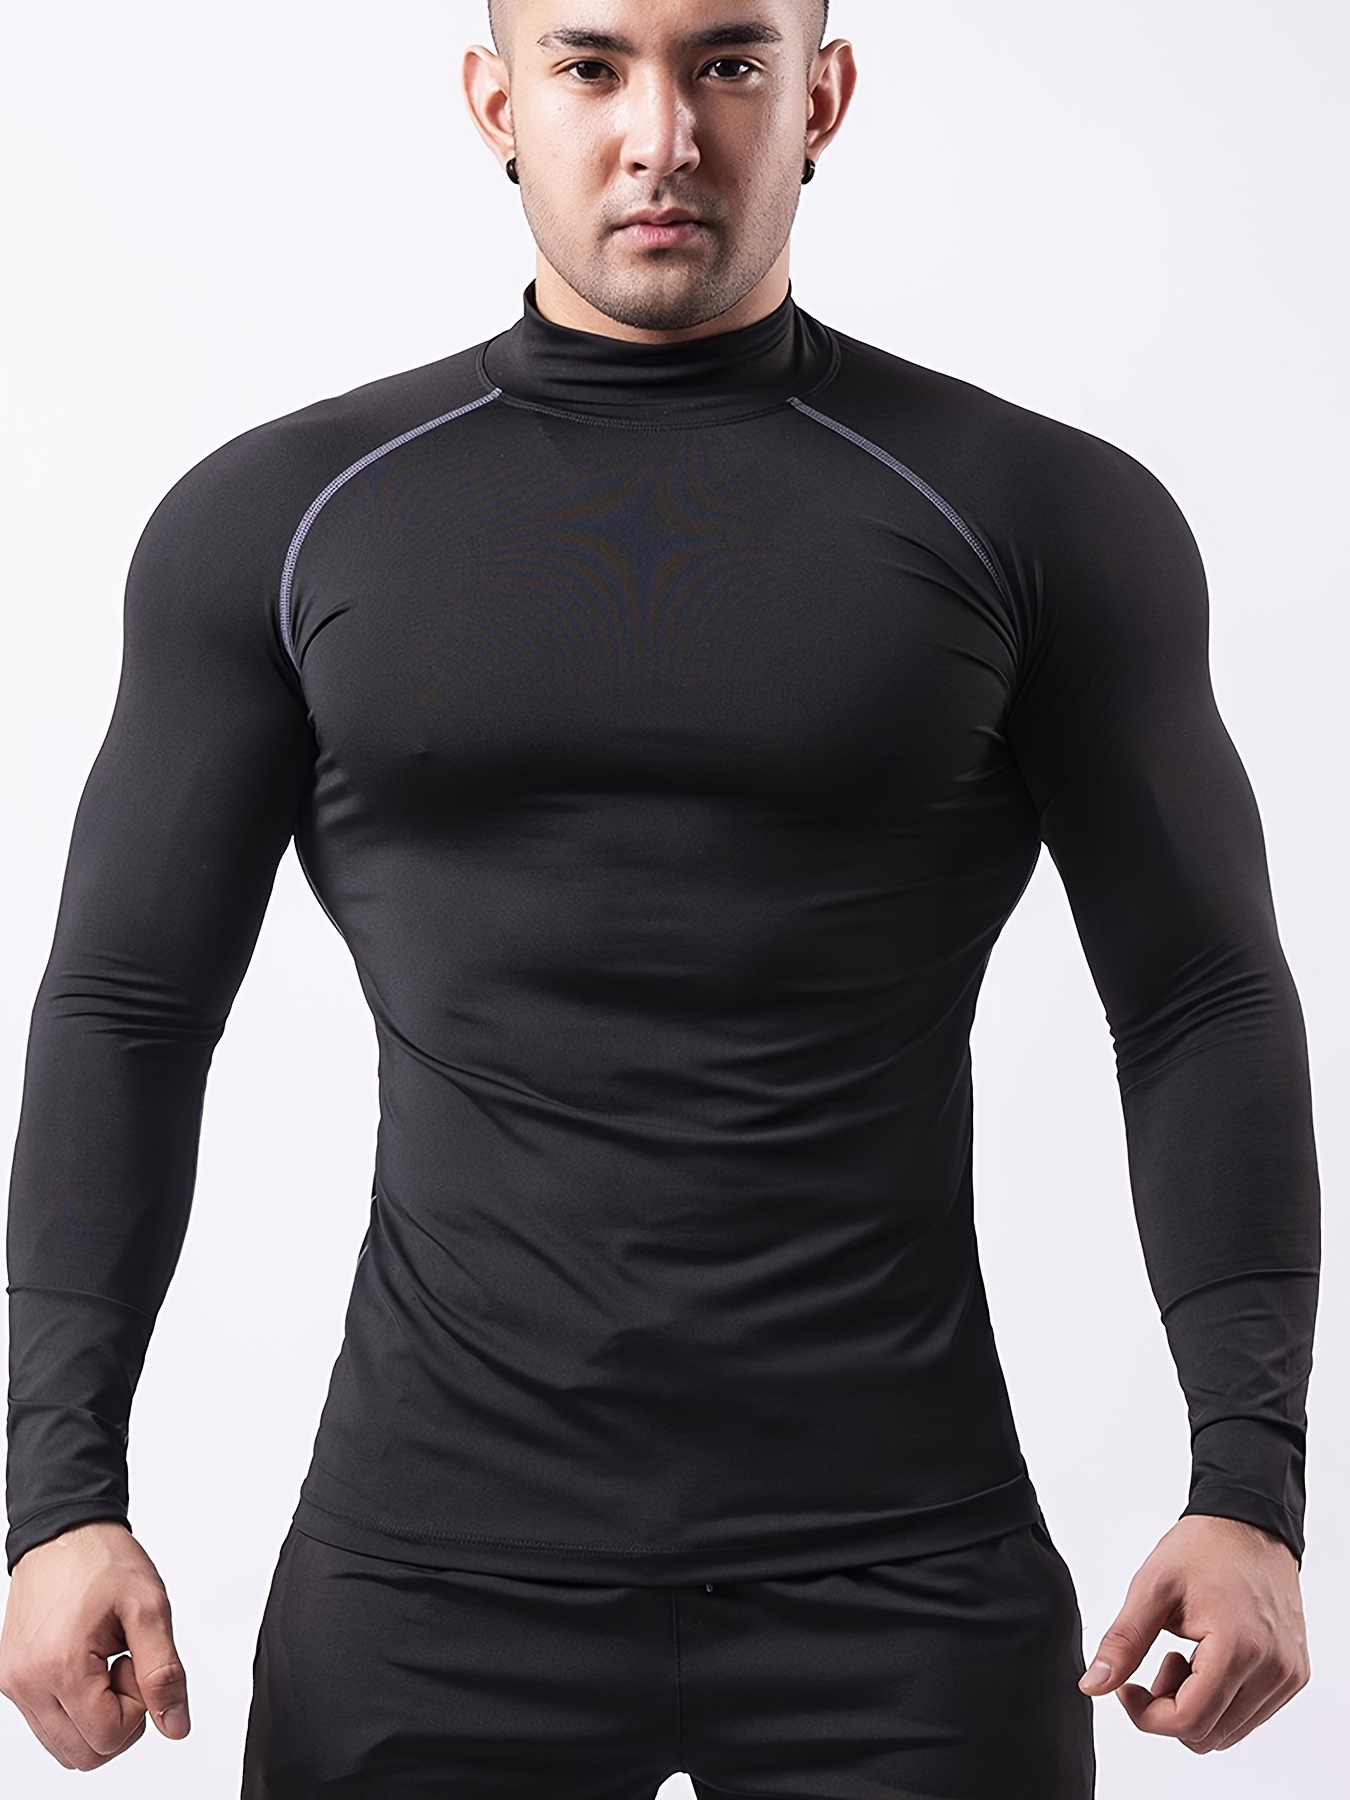  TELALEO 5 Pack Men's Thermal Compression Shirts Long Sleeve  Turtle Mock Neck Shirts Athletic Base Layer Top Winter Cold Gear S :  Clothing, Shoes & Jewelry